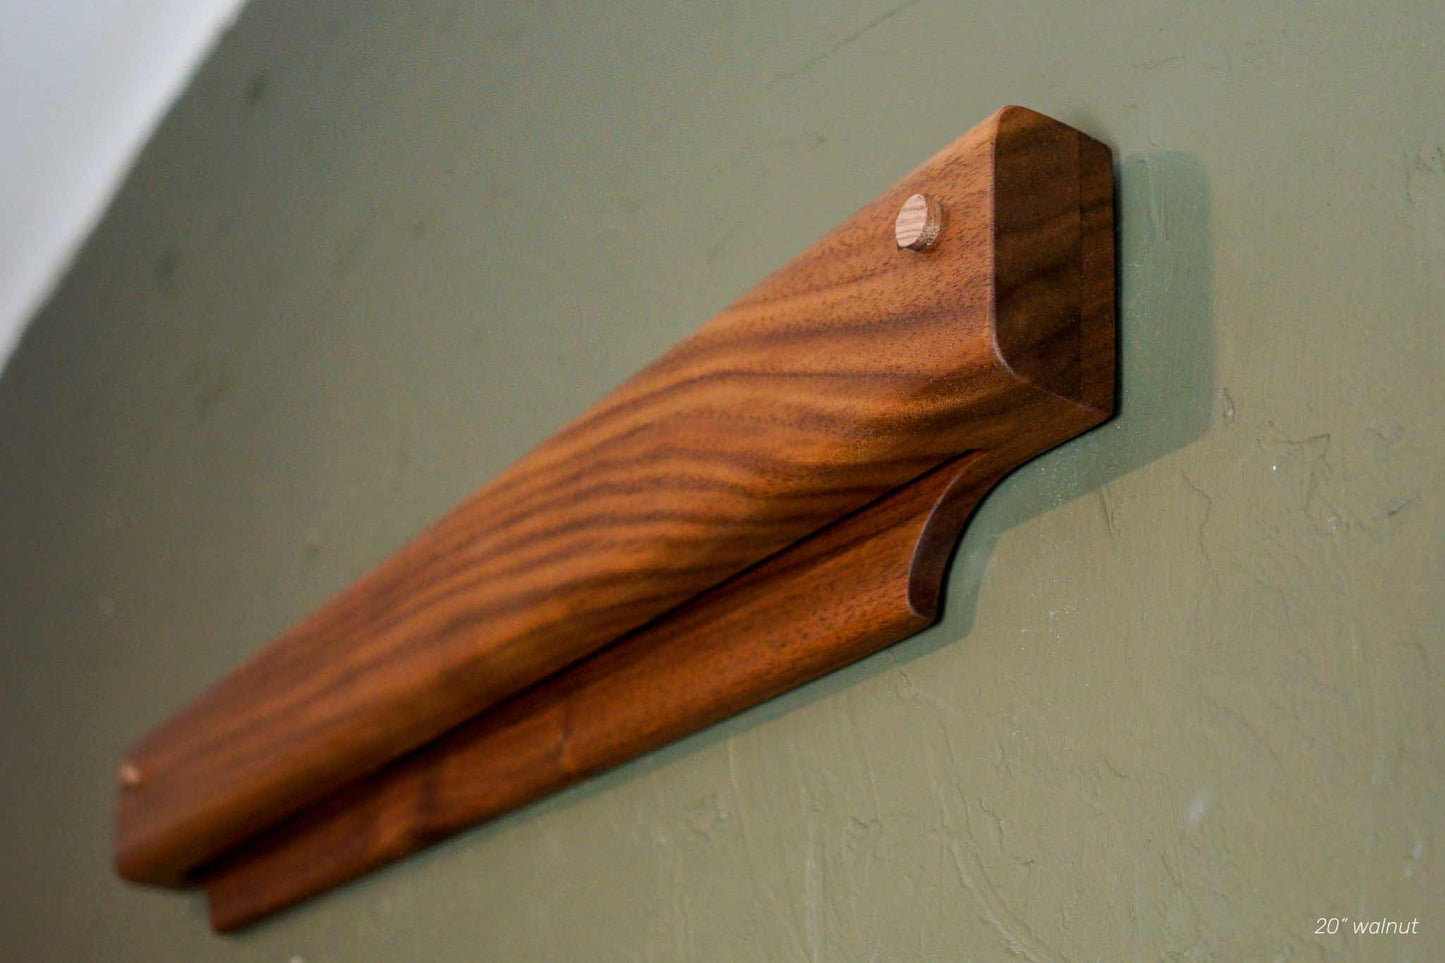 The Gravity Bar, by Biglow Woodcraft; a wooden holder for papers, pictures and images. Two wooden bar installed on a green wall. Hardwood Walnut